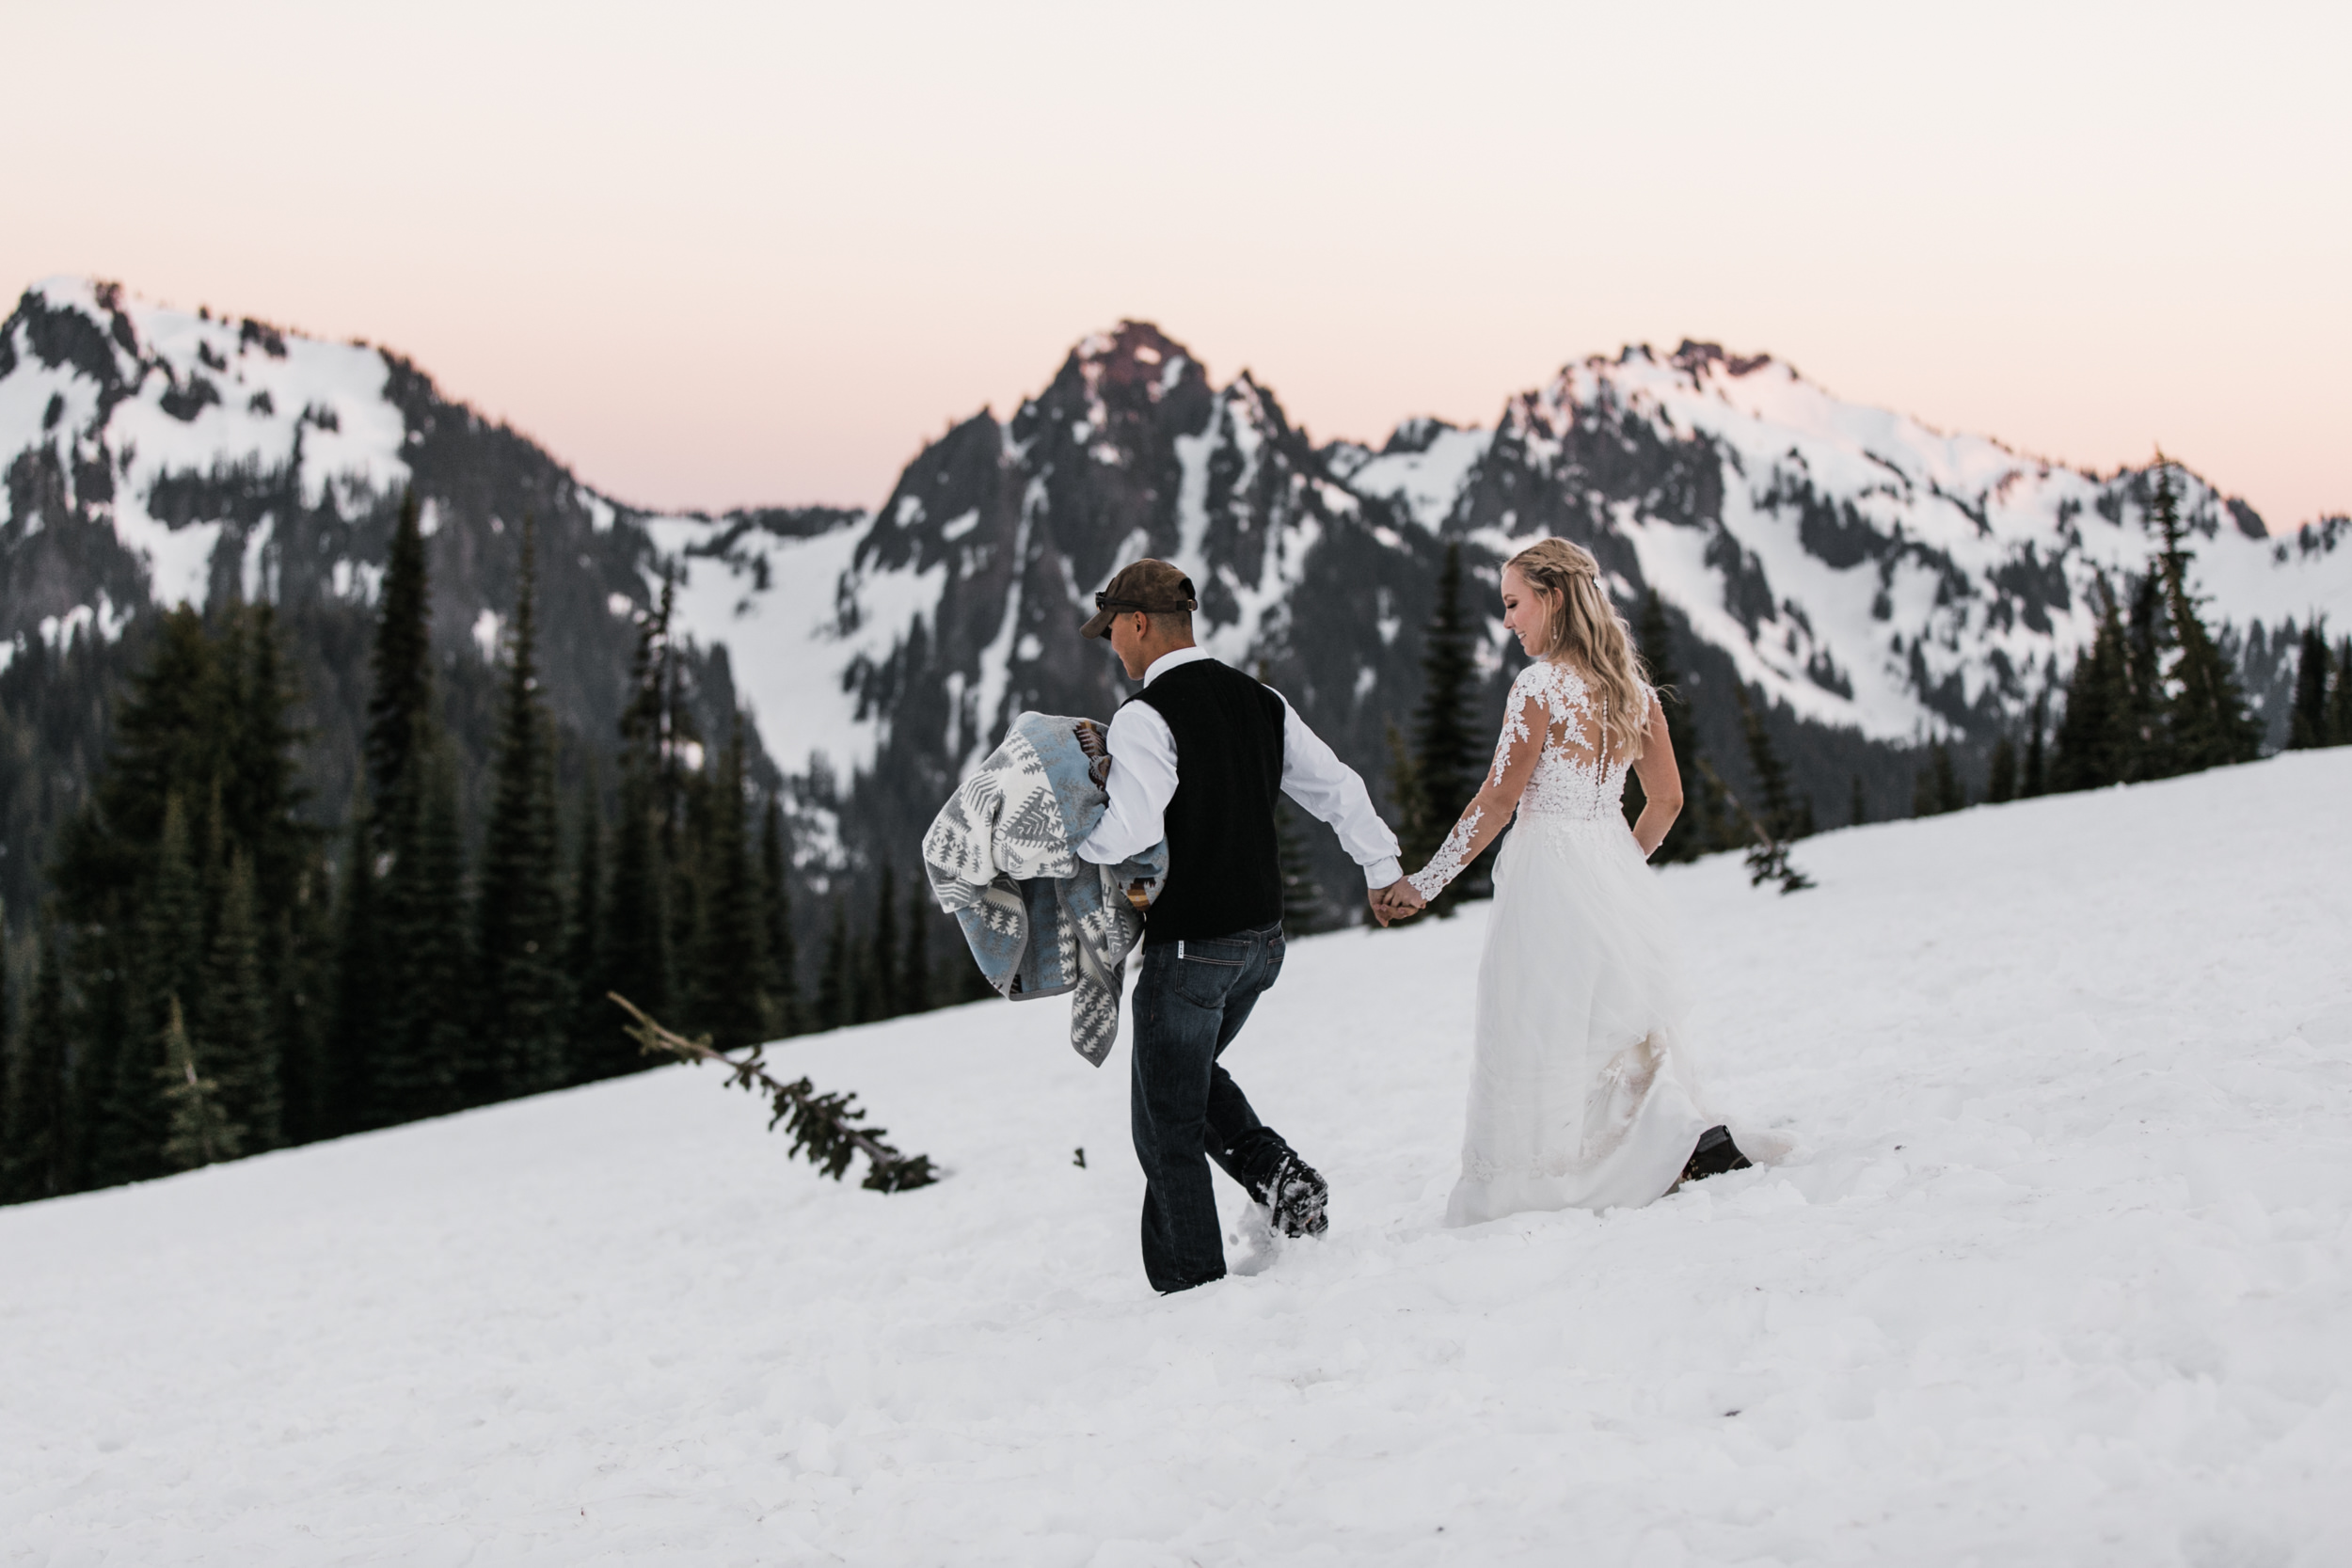 snowy wedding | long sleeve wedding dress | pendleton silver bark wedding blanket | wedding portraits in the snow in mount rainier | first dance in the mountains | national park elopement photographer